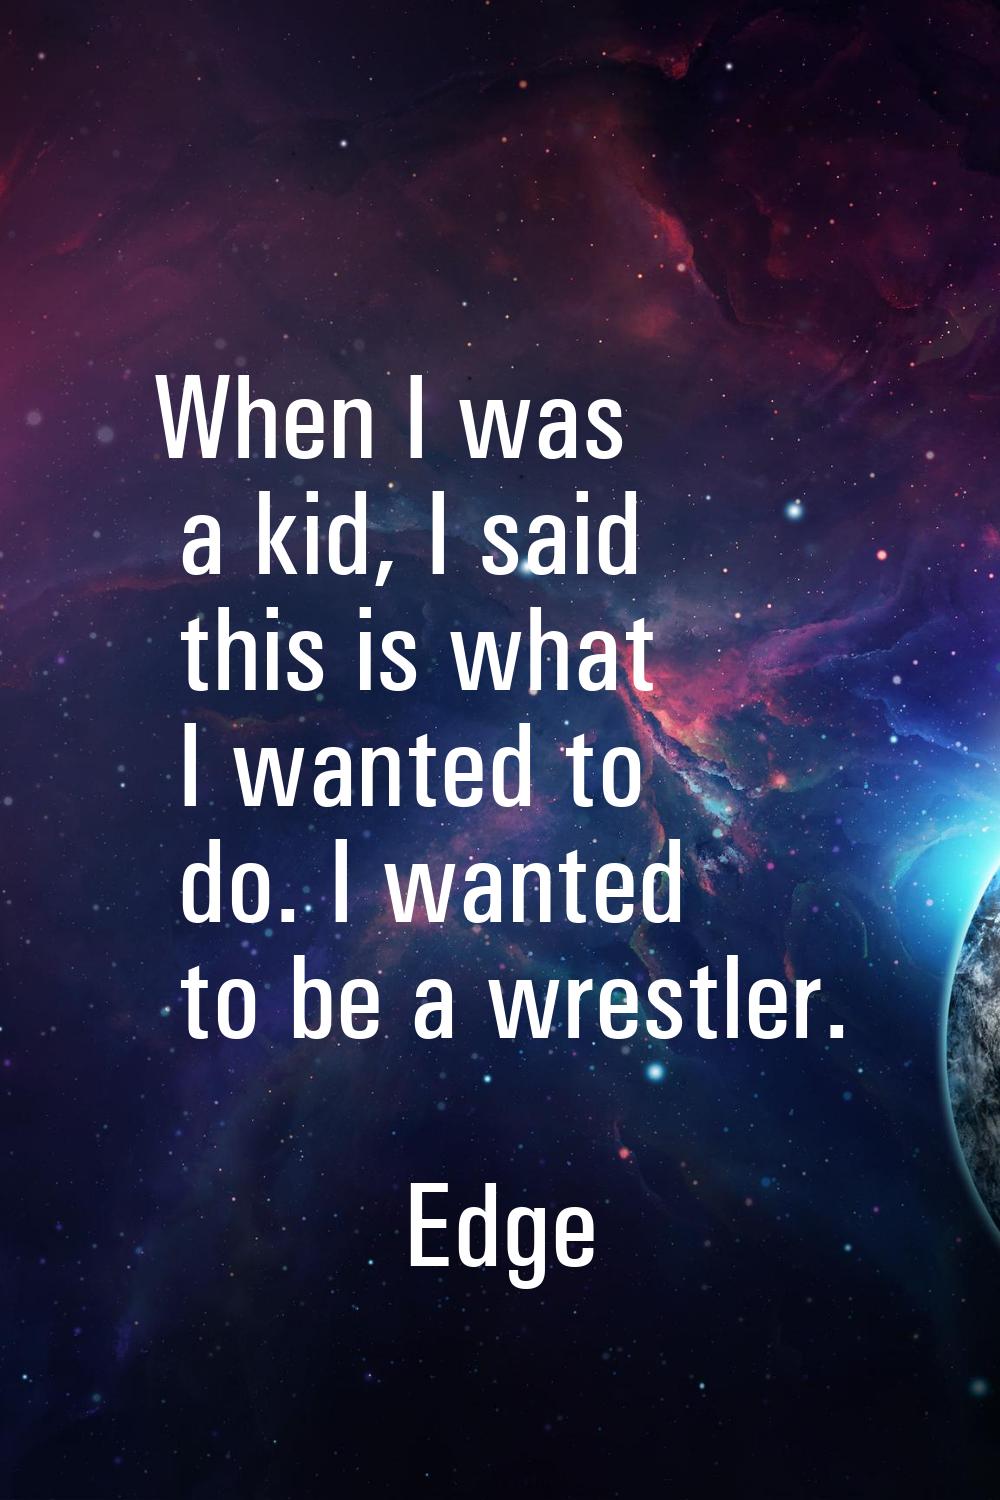 When I was a kid, I said this is what I wanted to do. I wanted to be a wrestler.